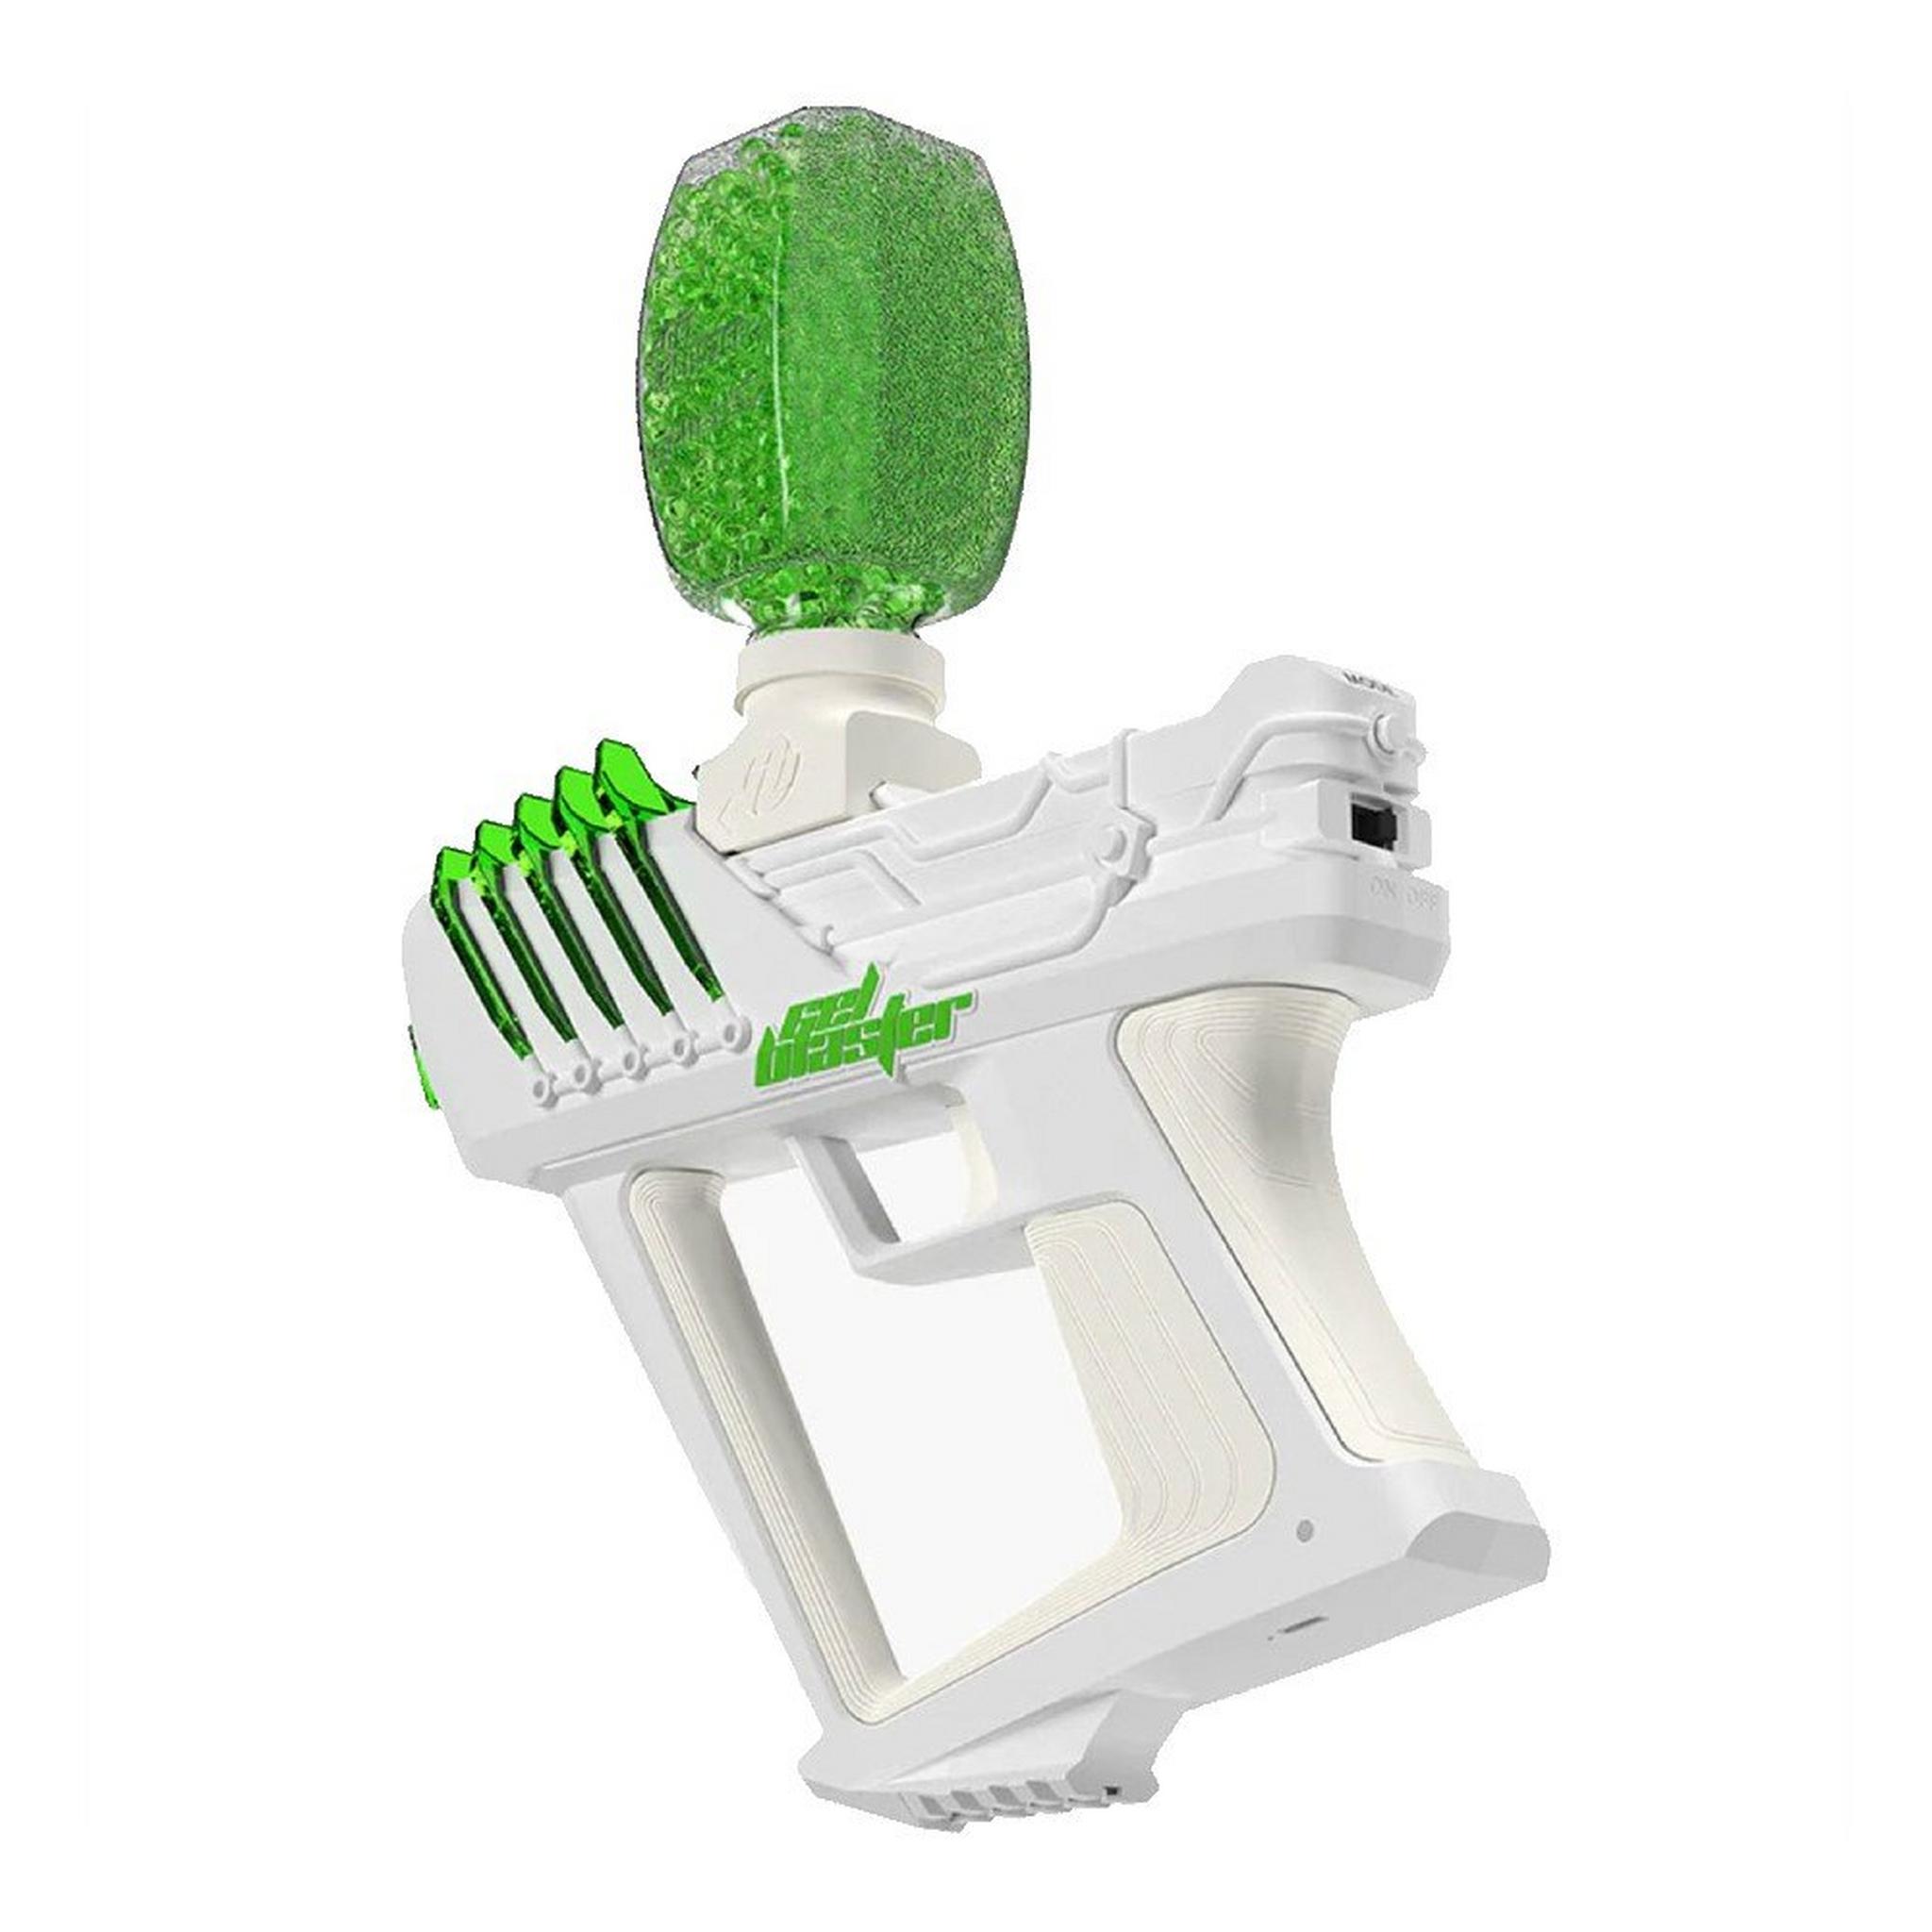 Gel Blaster Surge Fully Automatic Rechargable Blaster with 10,000 Pellets, GBSG1809-5L – White& Green